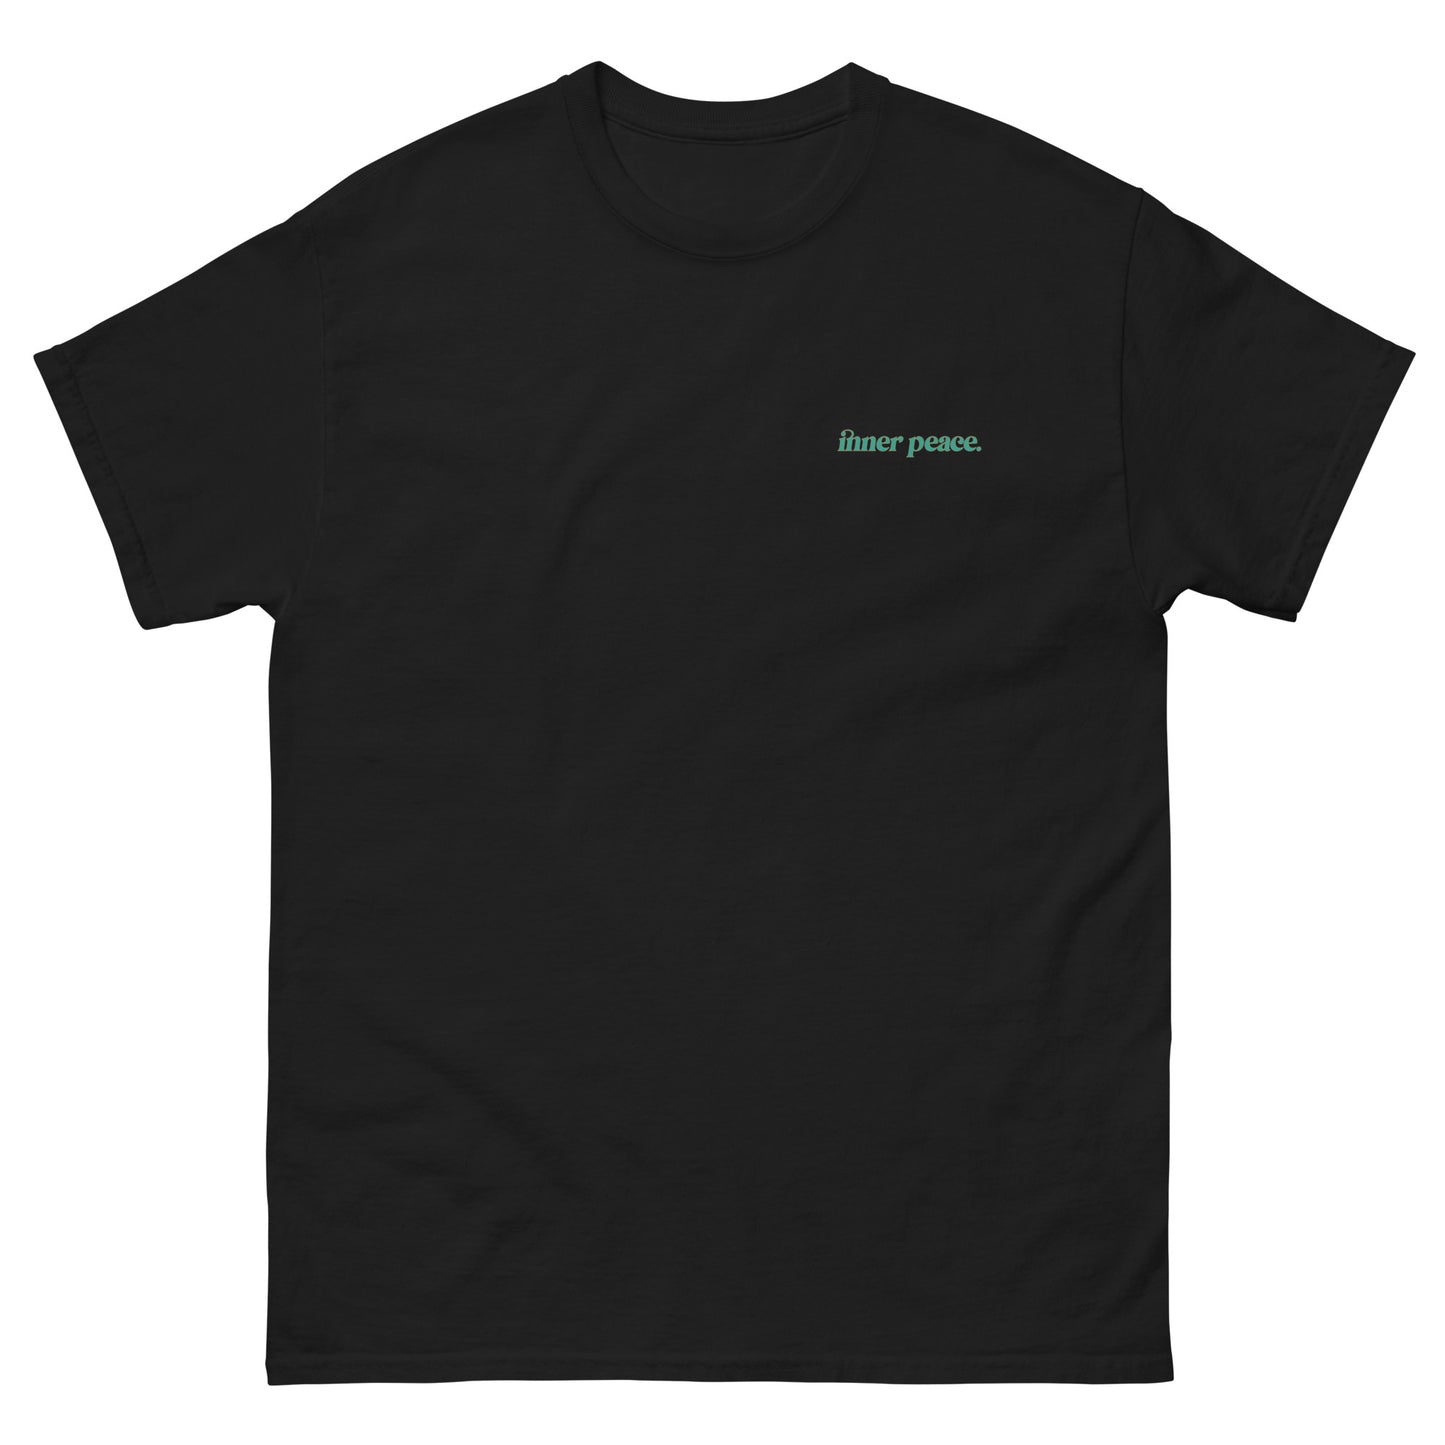 Black High Quality Tee - Front Design with "inner peace " print on left chest - Back Design with a Phrase "You know what's the real luxury? Your inner peace." print